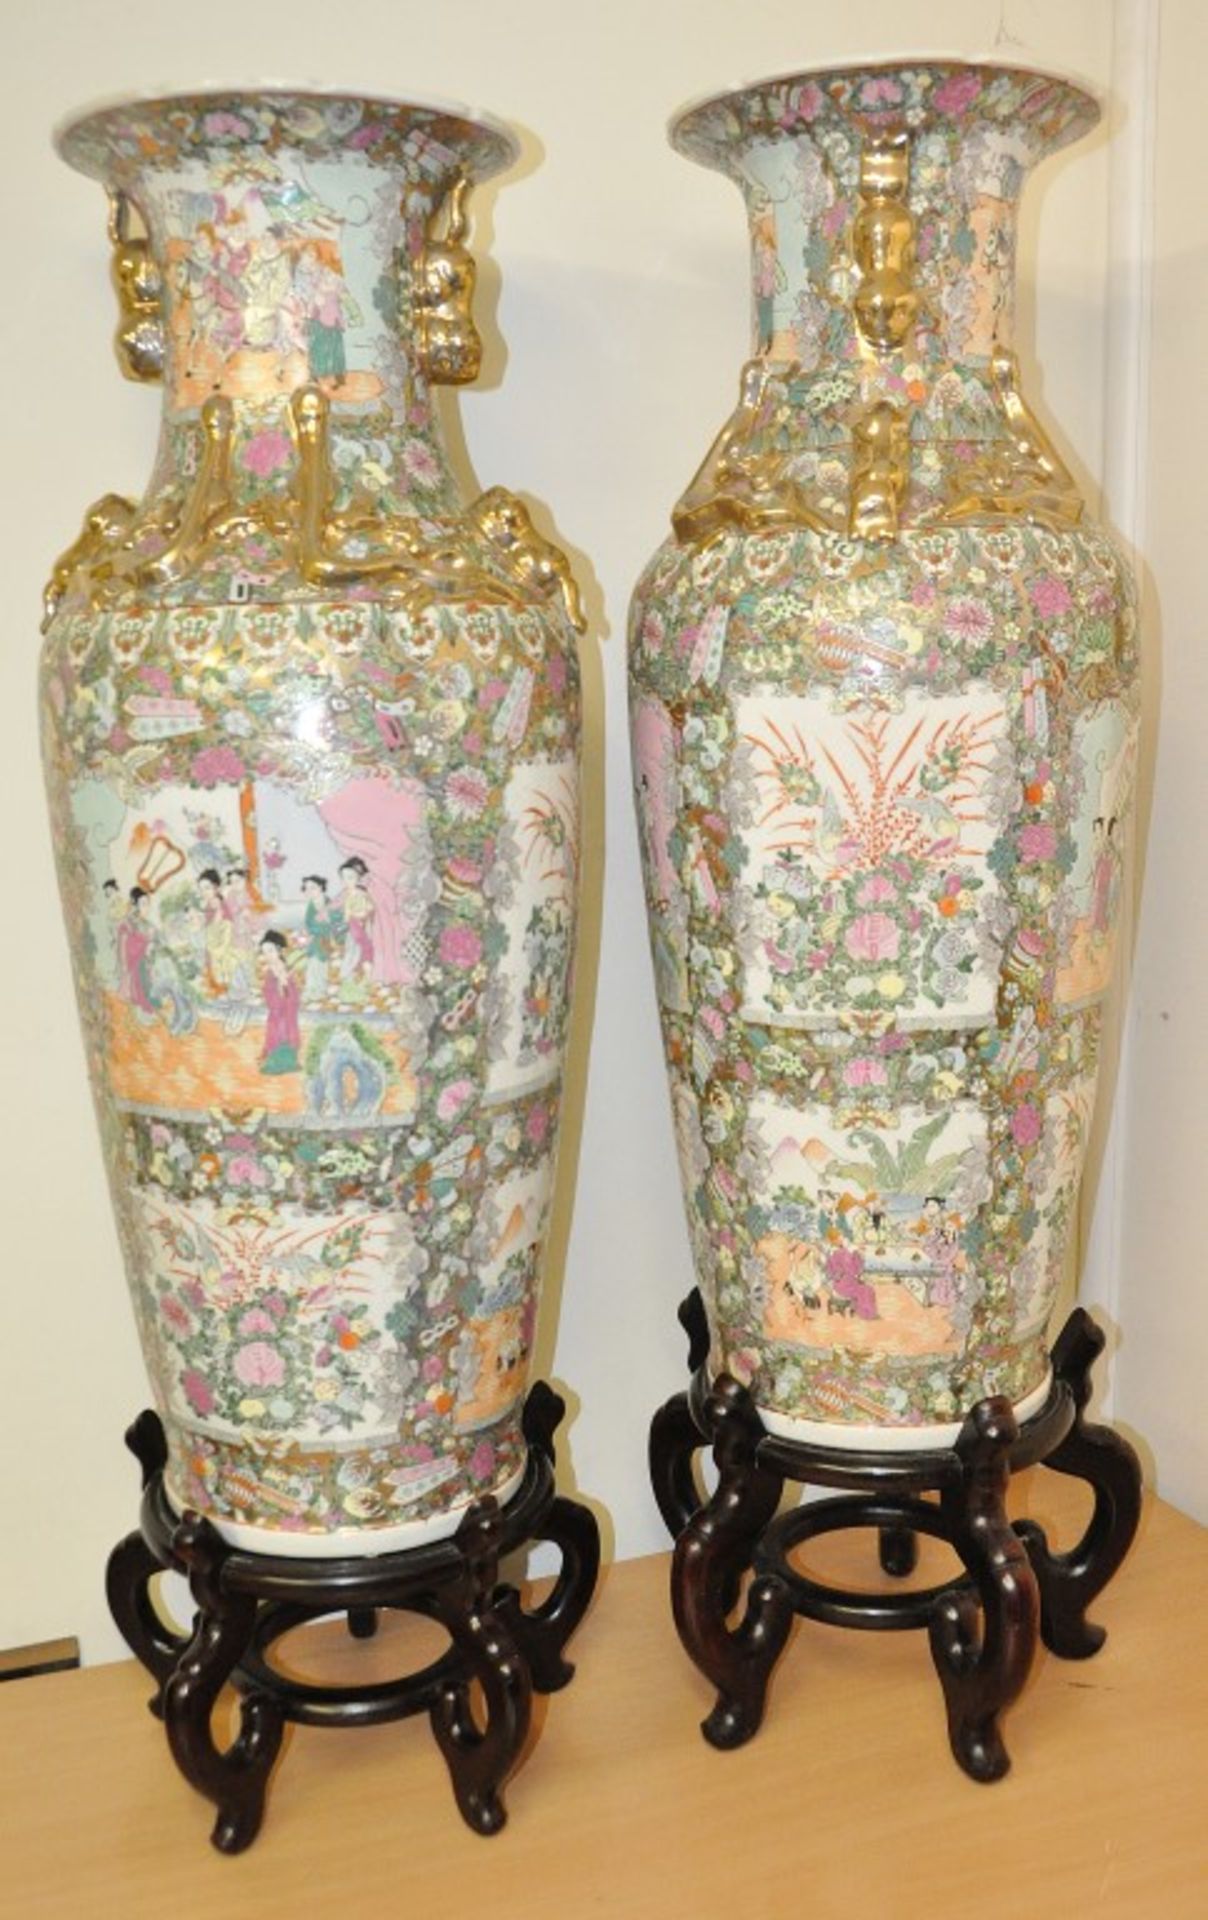 Pair Of Matching Chinese Export Rose Medallion Vases - Both 3ft High - LATE 19TH 20TH CENTURY-